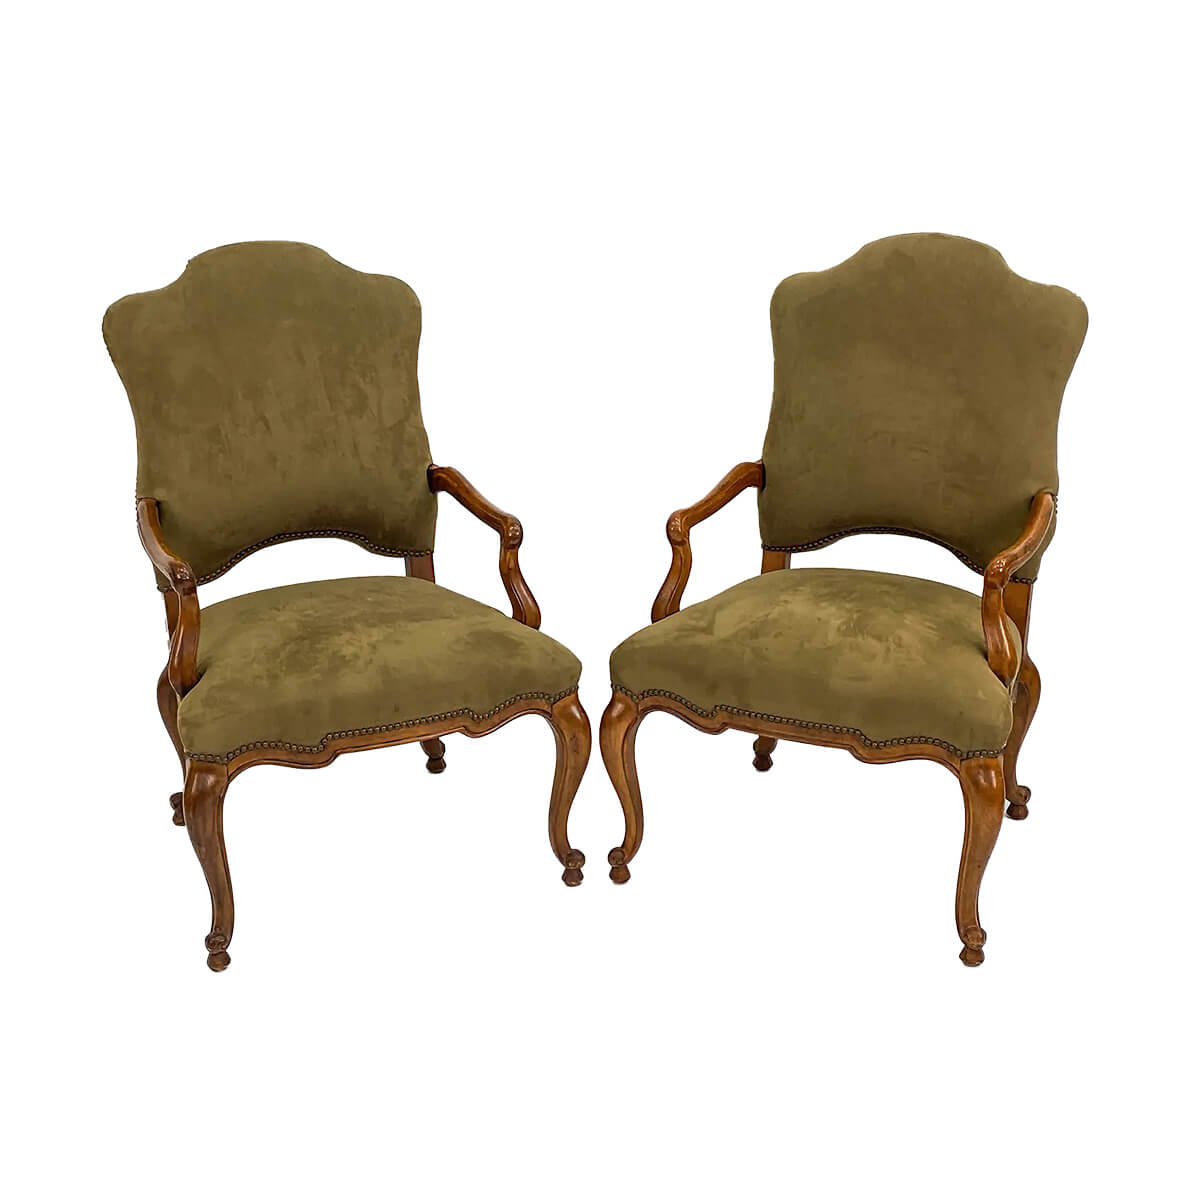 Pair of French Provincial Antique Armchairs - English Georgian America